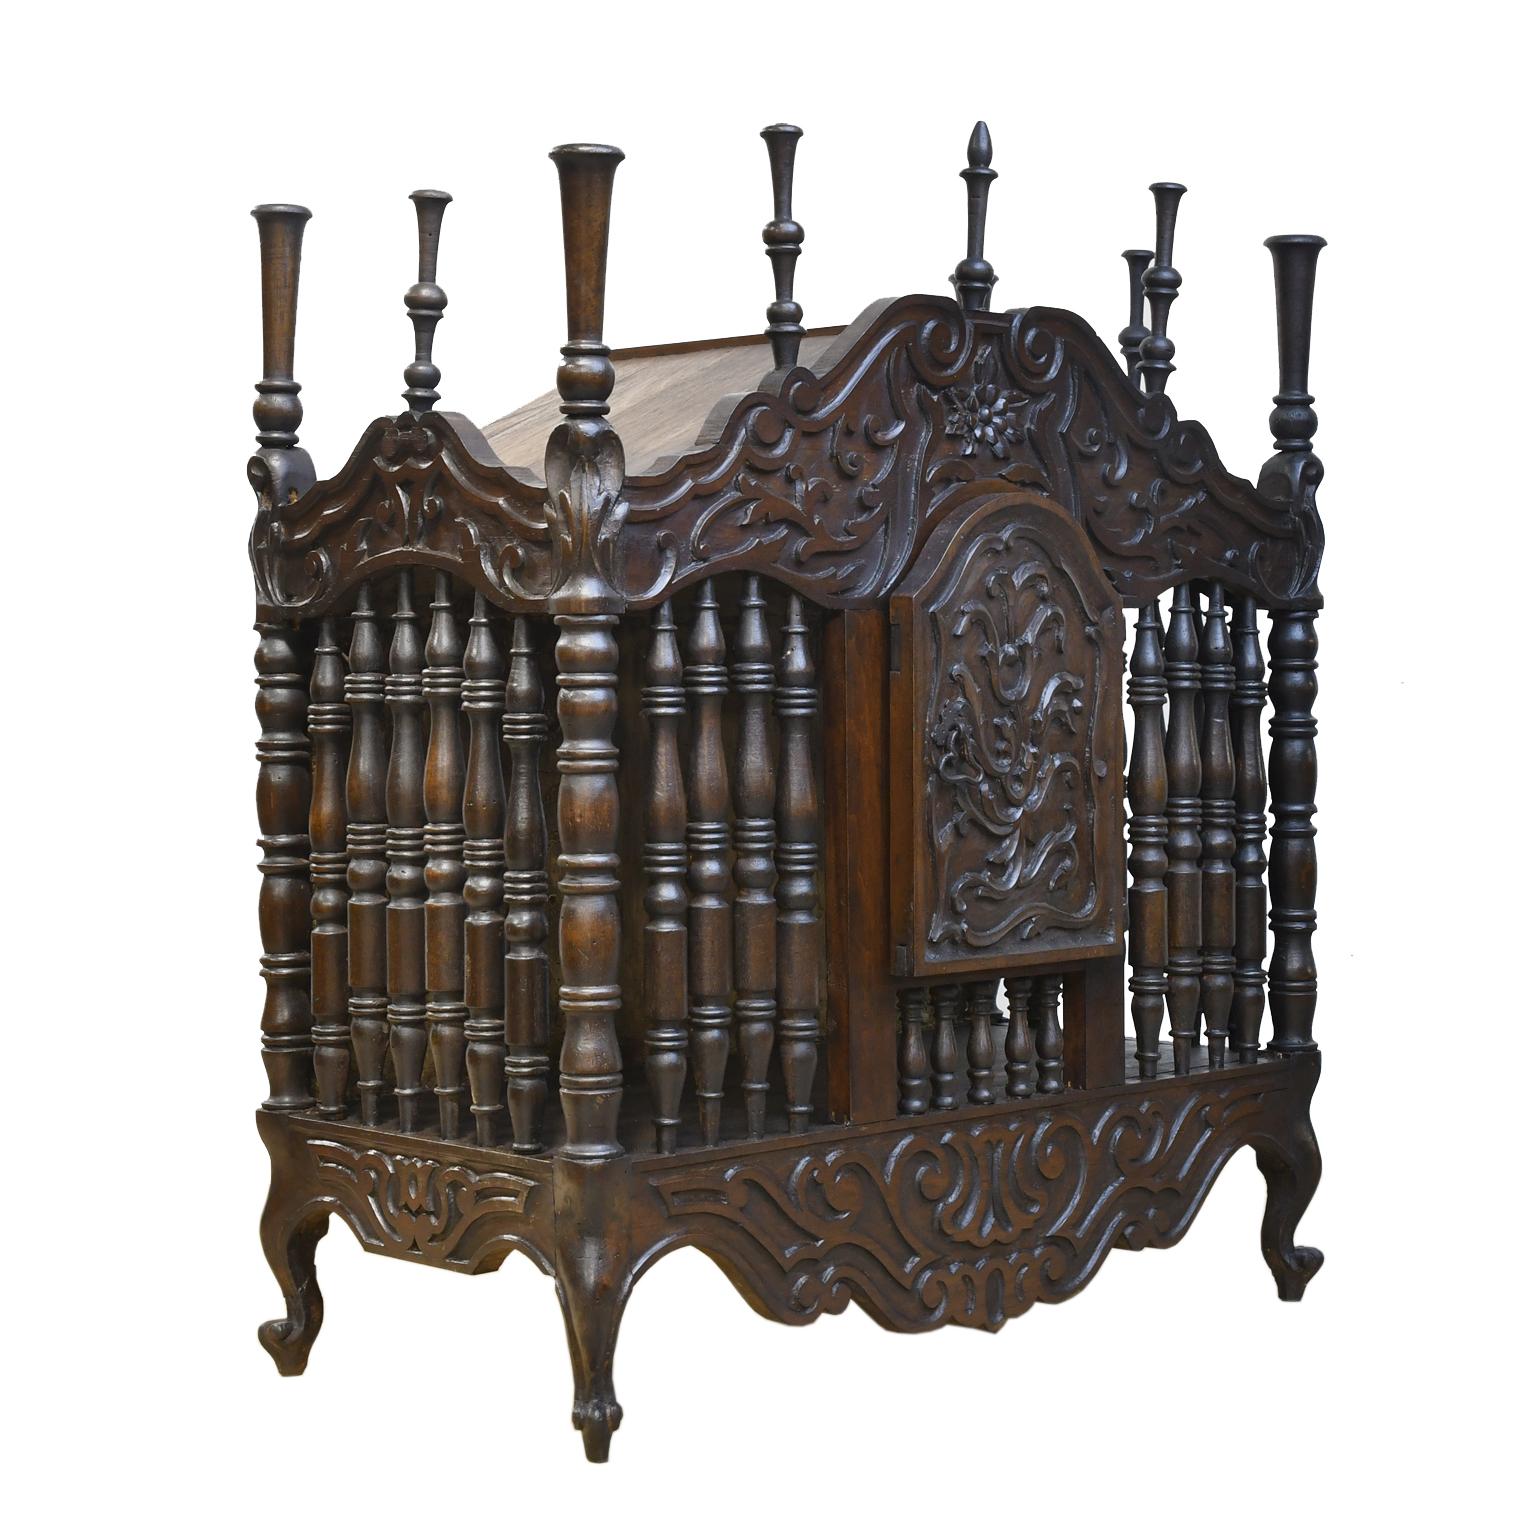 19th Century French Provencal Panetière Bread Cupboard in Carved Chestnut In Good Condition For Sale In Miami, FL